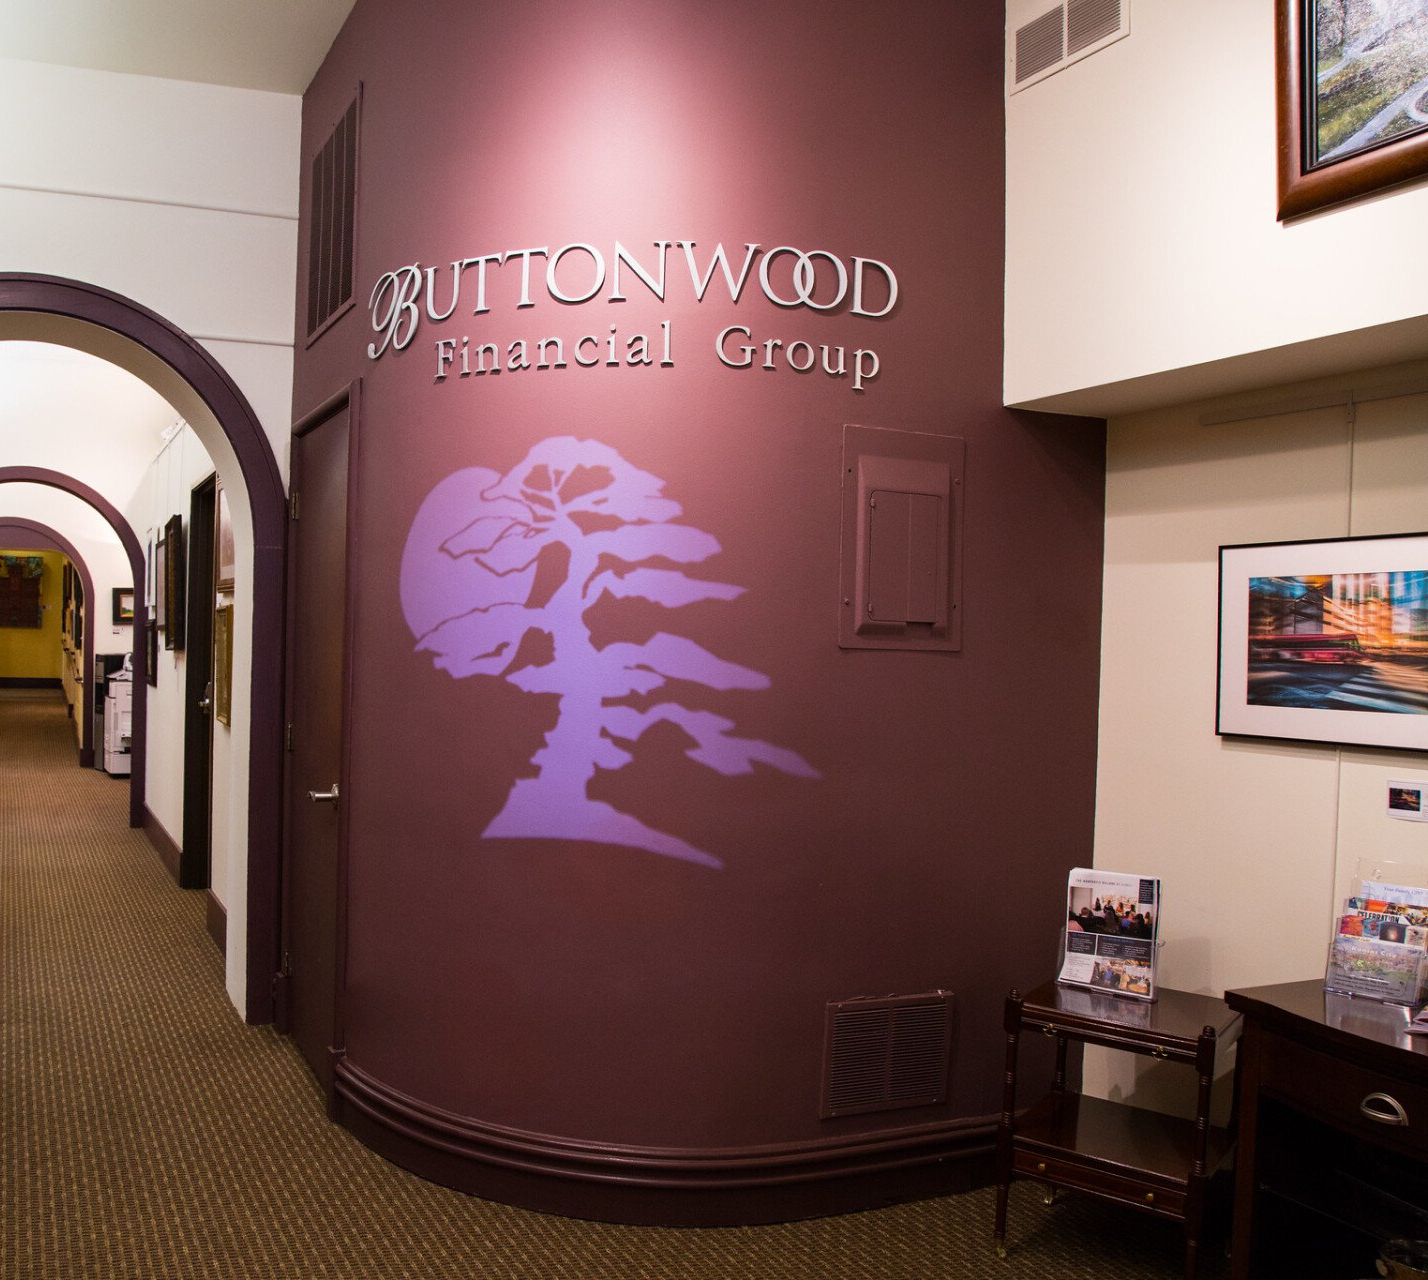 buttonwood financial group, llc office space